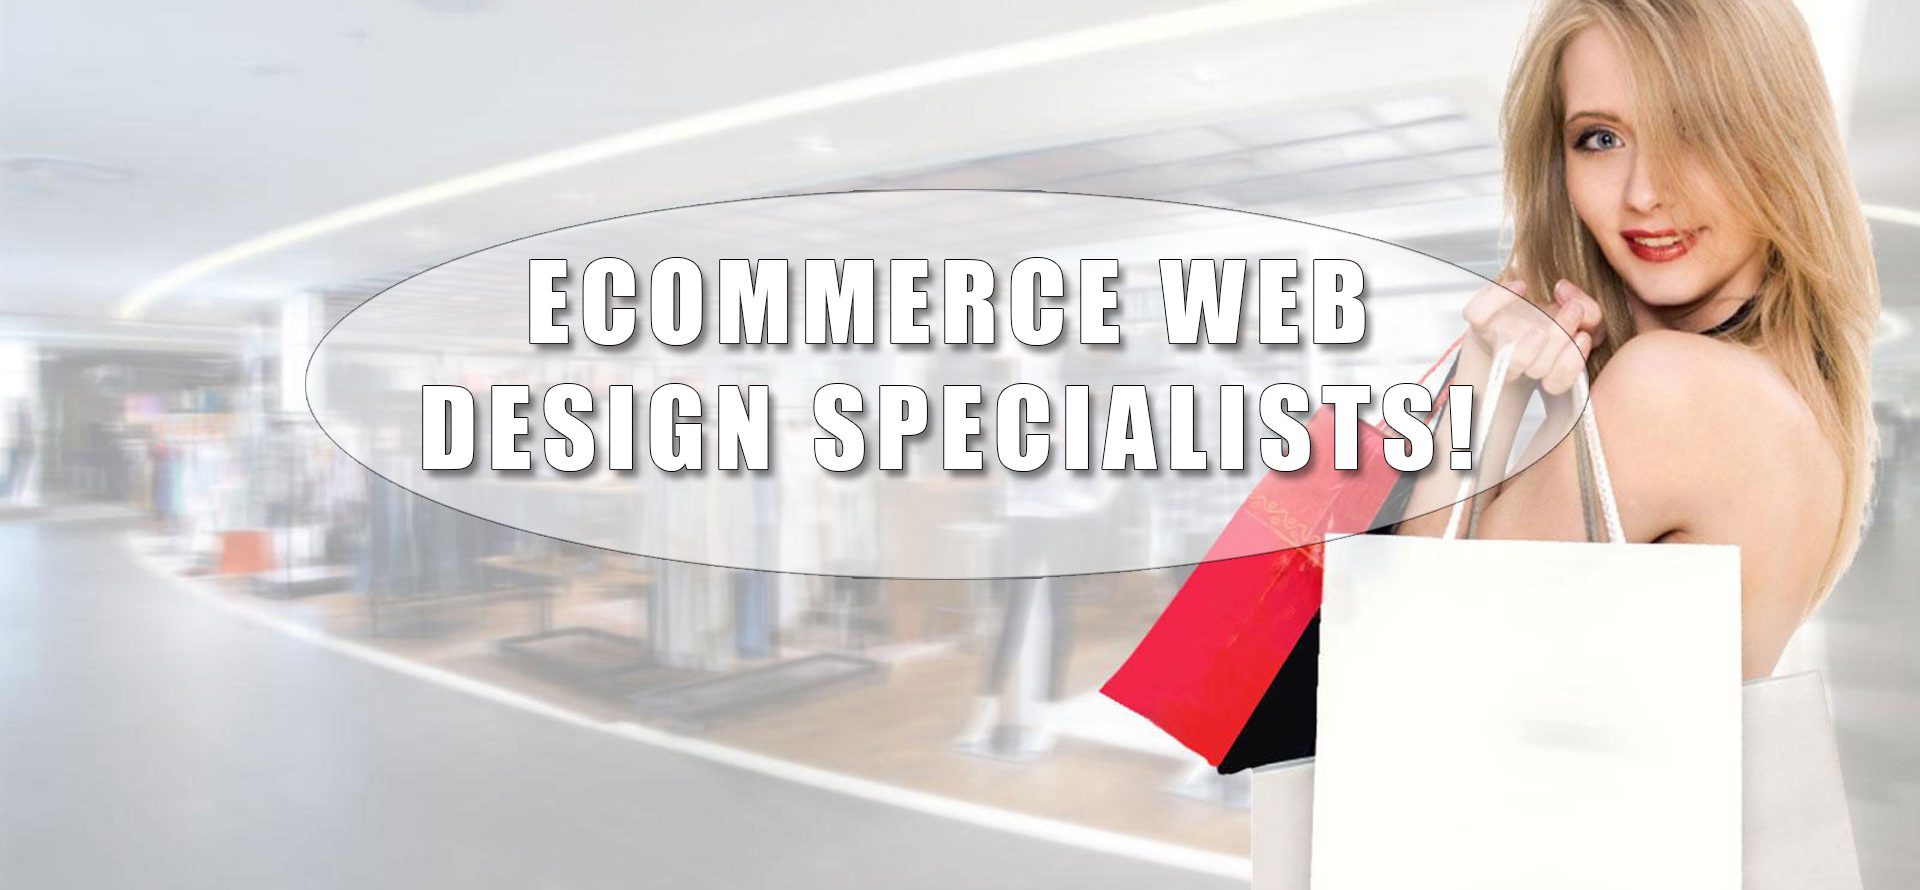 WordPress & Drupal eCommerce web design specialists with over 20 years of experience at your command!